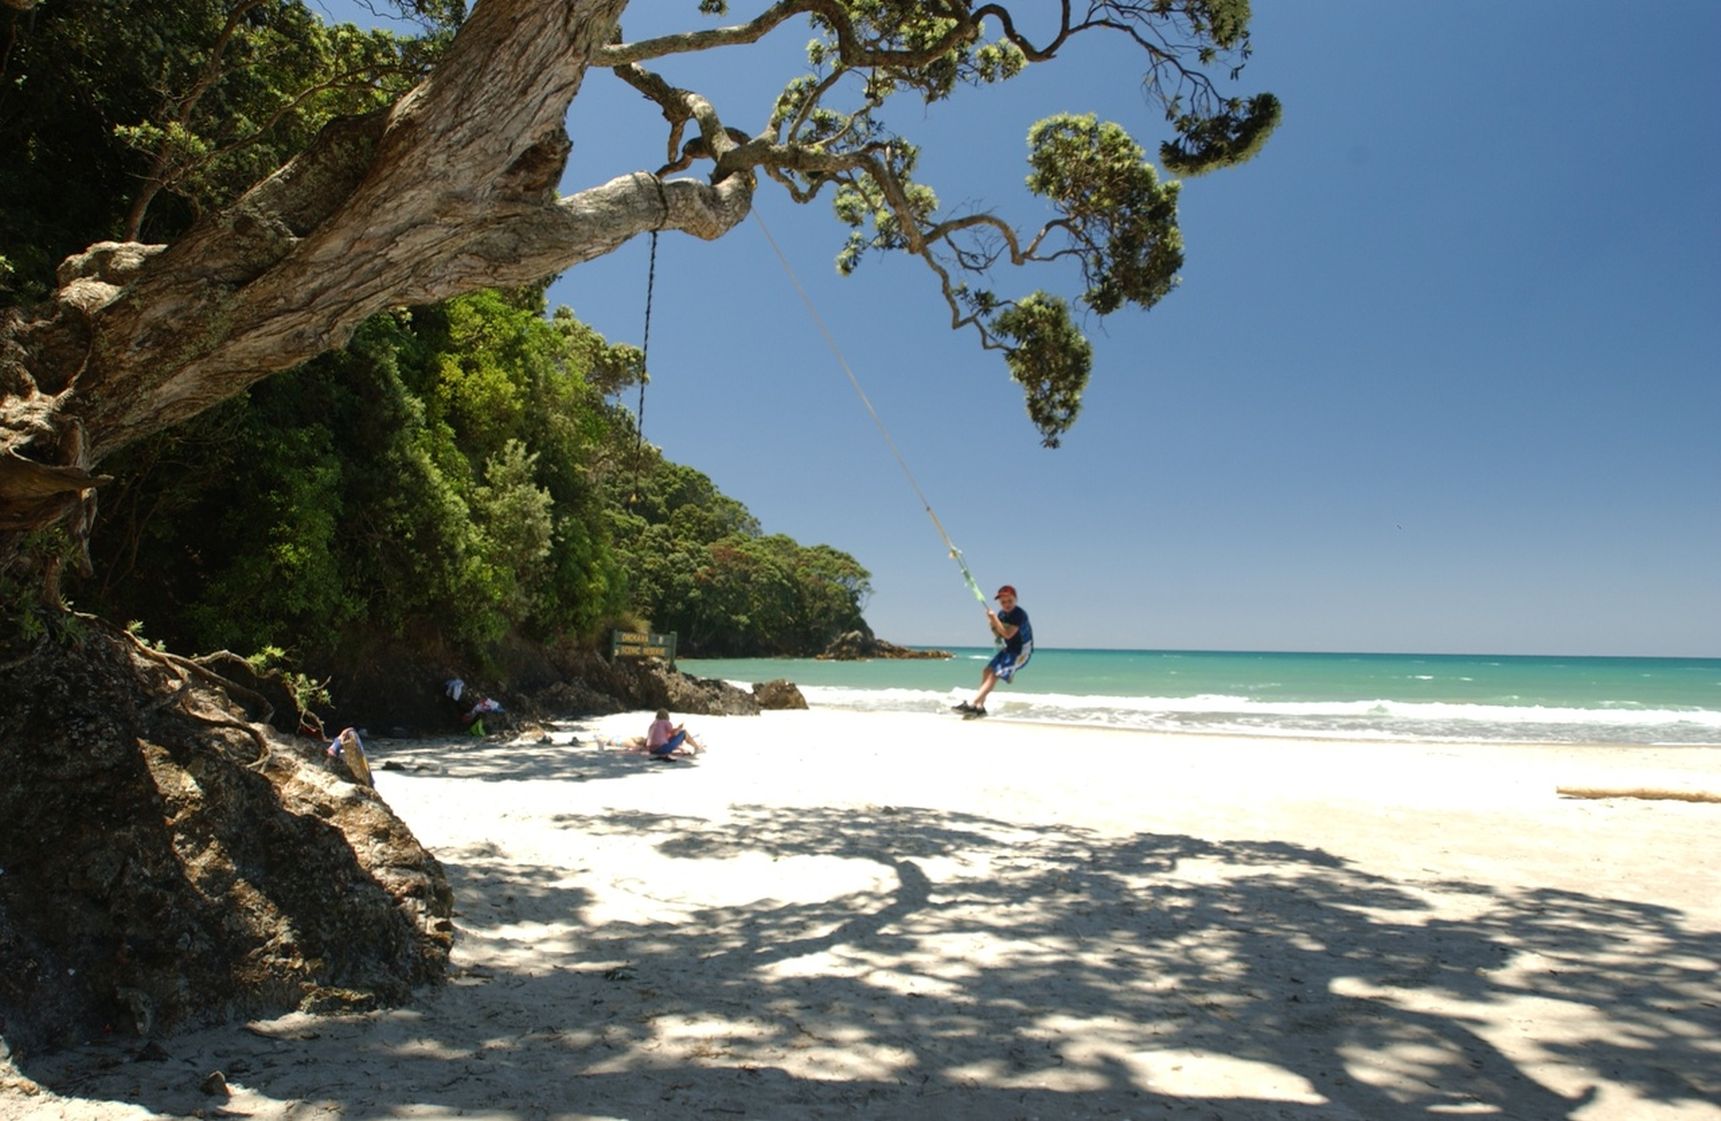 What to see and do at Waihī Beach